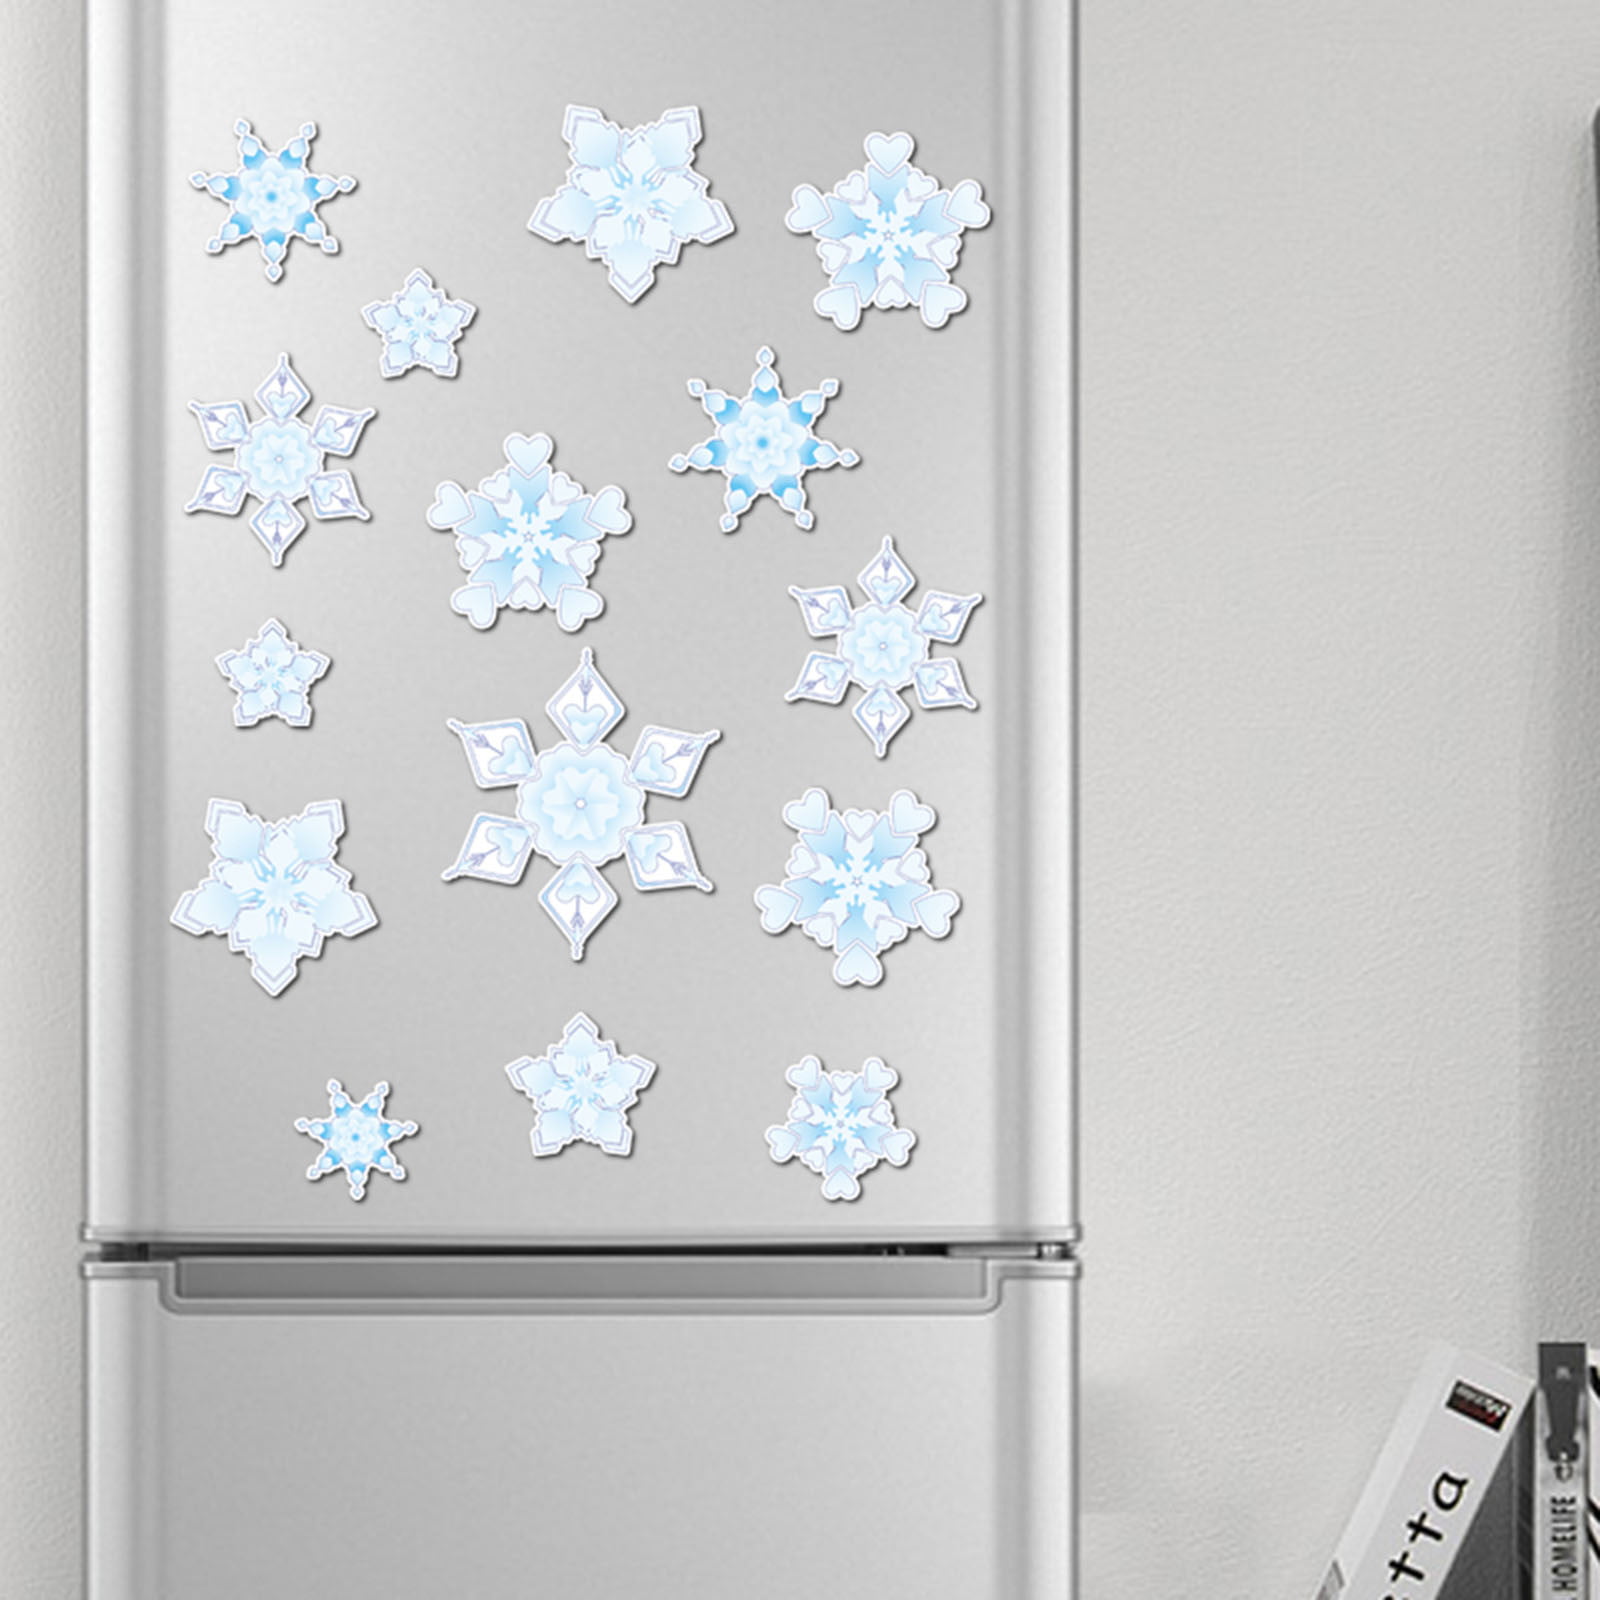 Set of Mini Snowflake Magnets. Painted Wood Snow Flakes. Cute Pastel  Christmas Decor Snowflakes, Shimmery Sparkly Winter Fridge Magnets. 